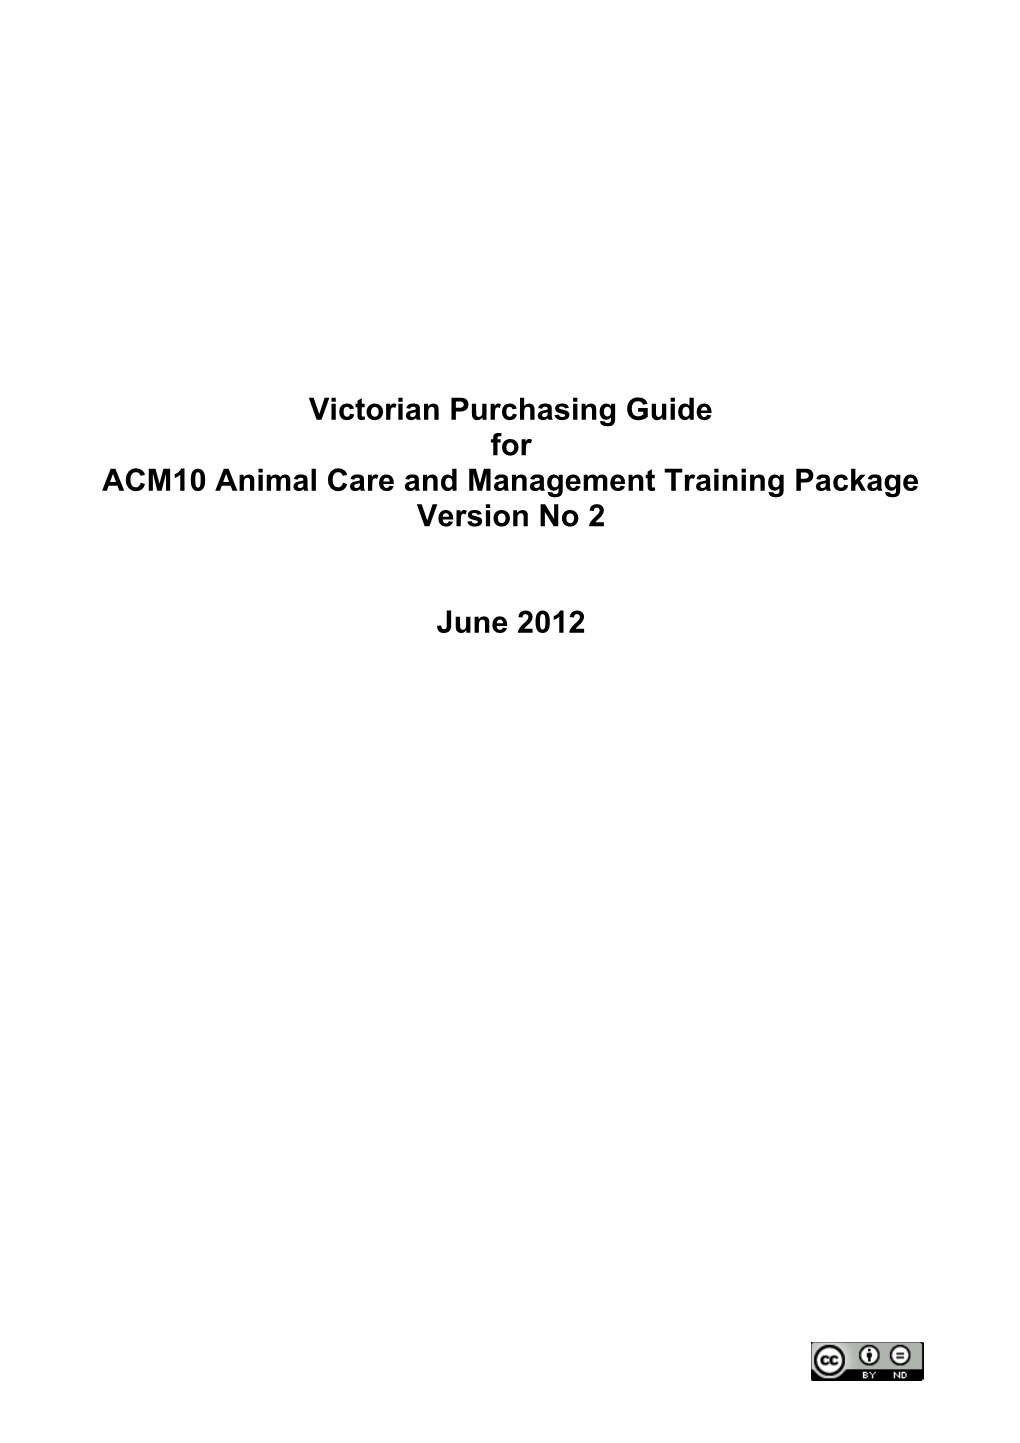 Victorian Purchasing Guide for ACM10 Animal Care and Management Version 2